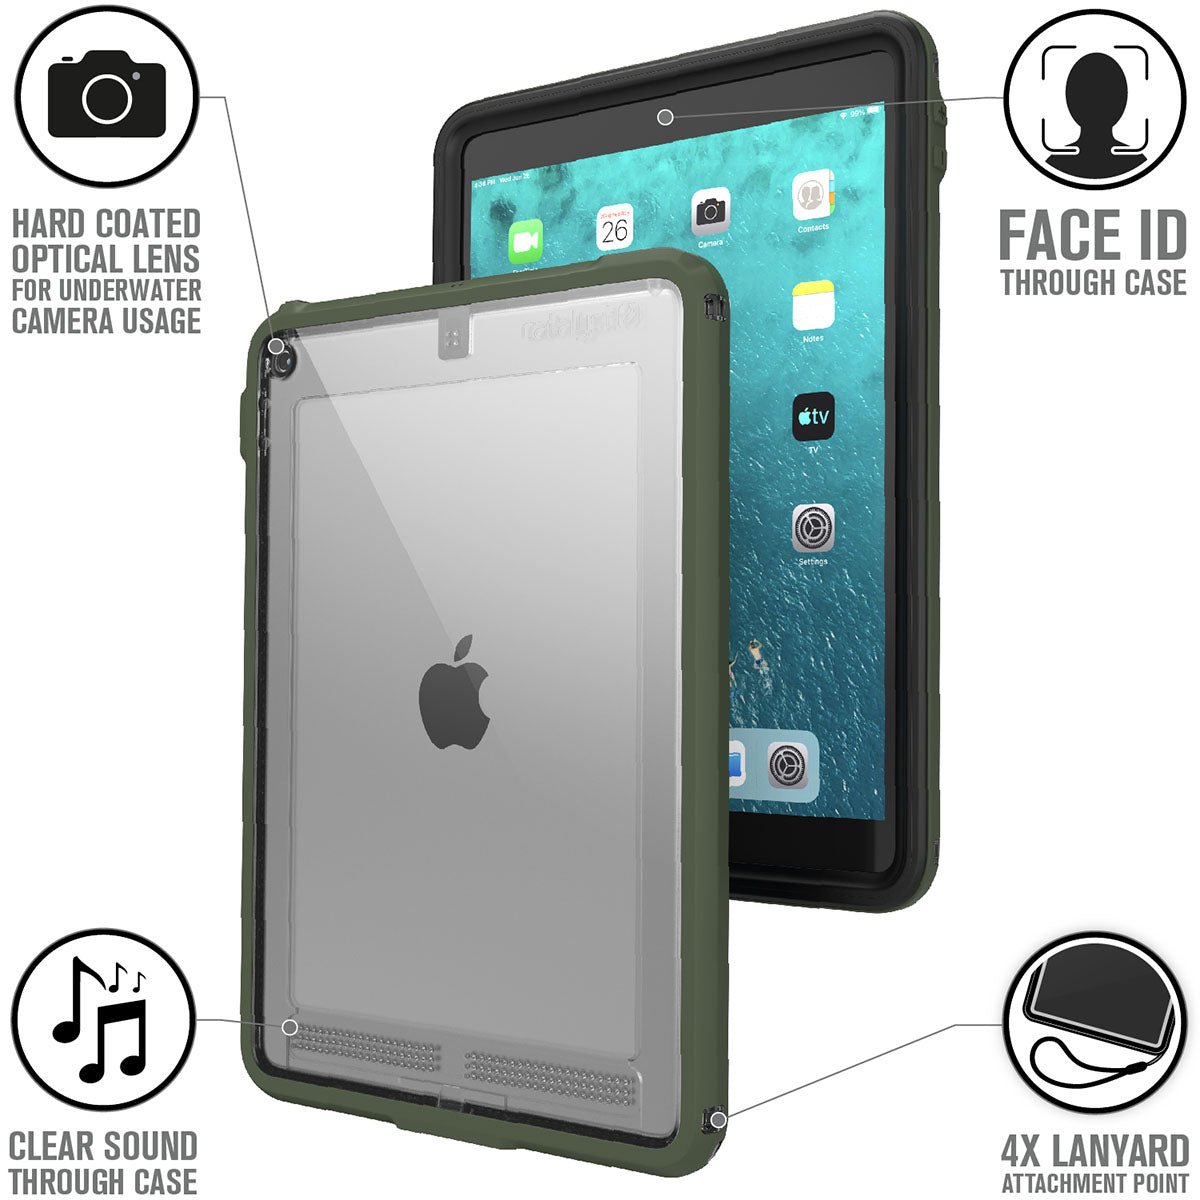 catalyst ipad air gen 3 10.5 waterproof case army green front and back view text reads hard coated optical lens for underwater camera usage face id through case clear sound through case 4x lanyard attachment point